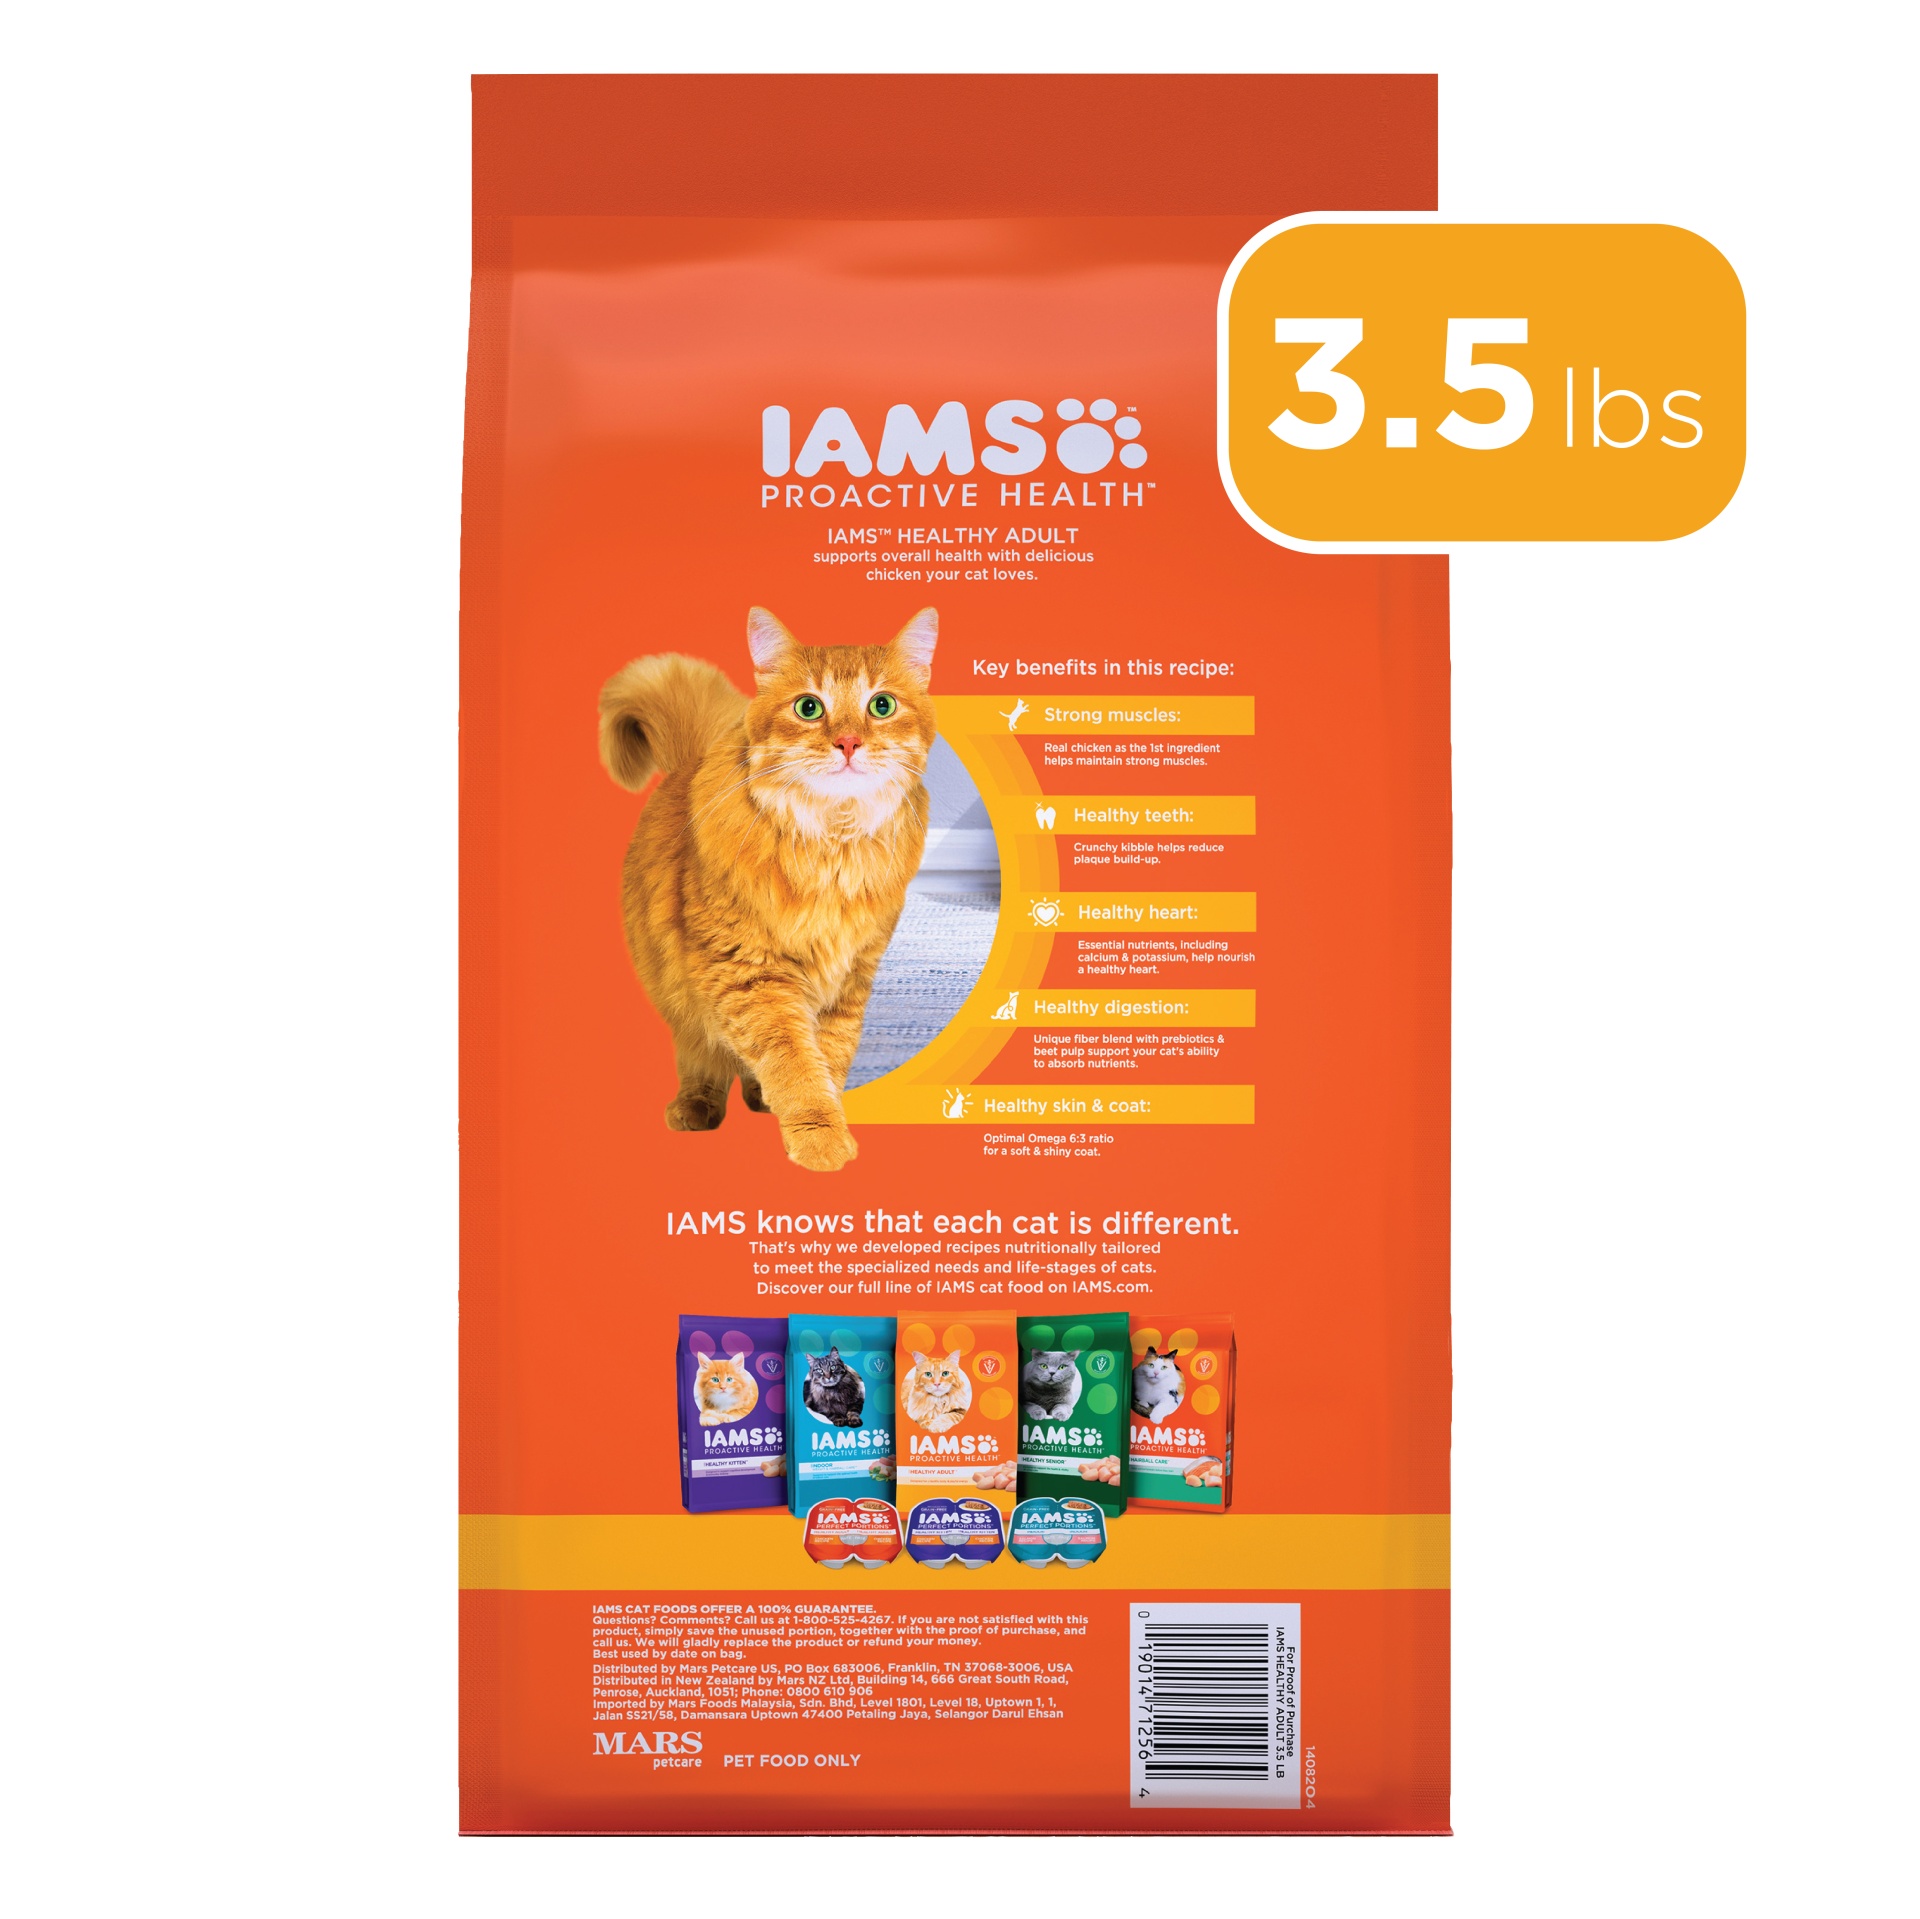 IAMS PROACTIVE HEALTH Adult Healthy Dry Cat Food with Chicken Cat